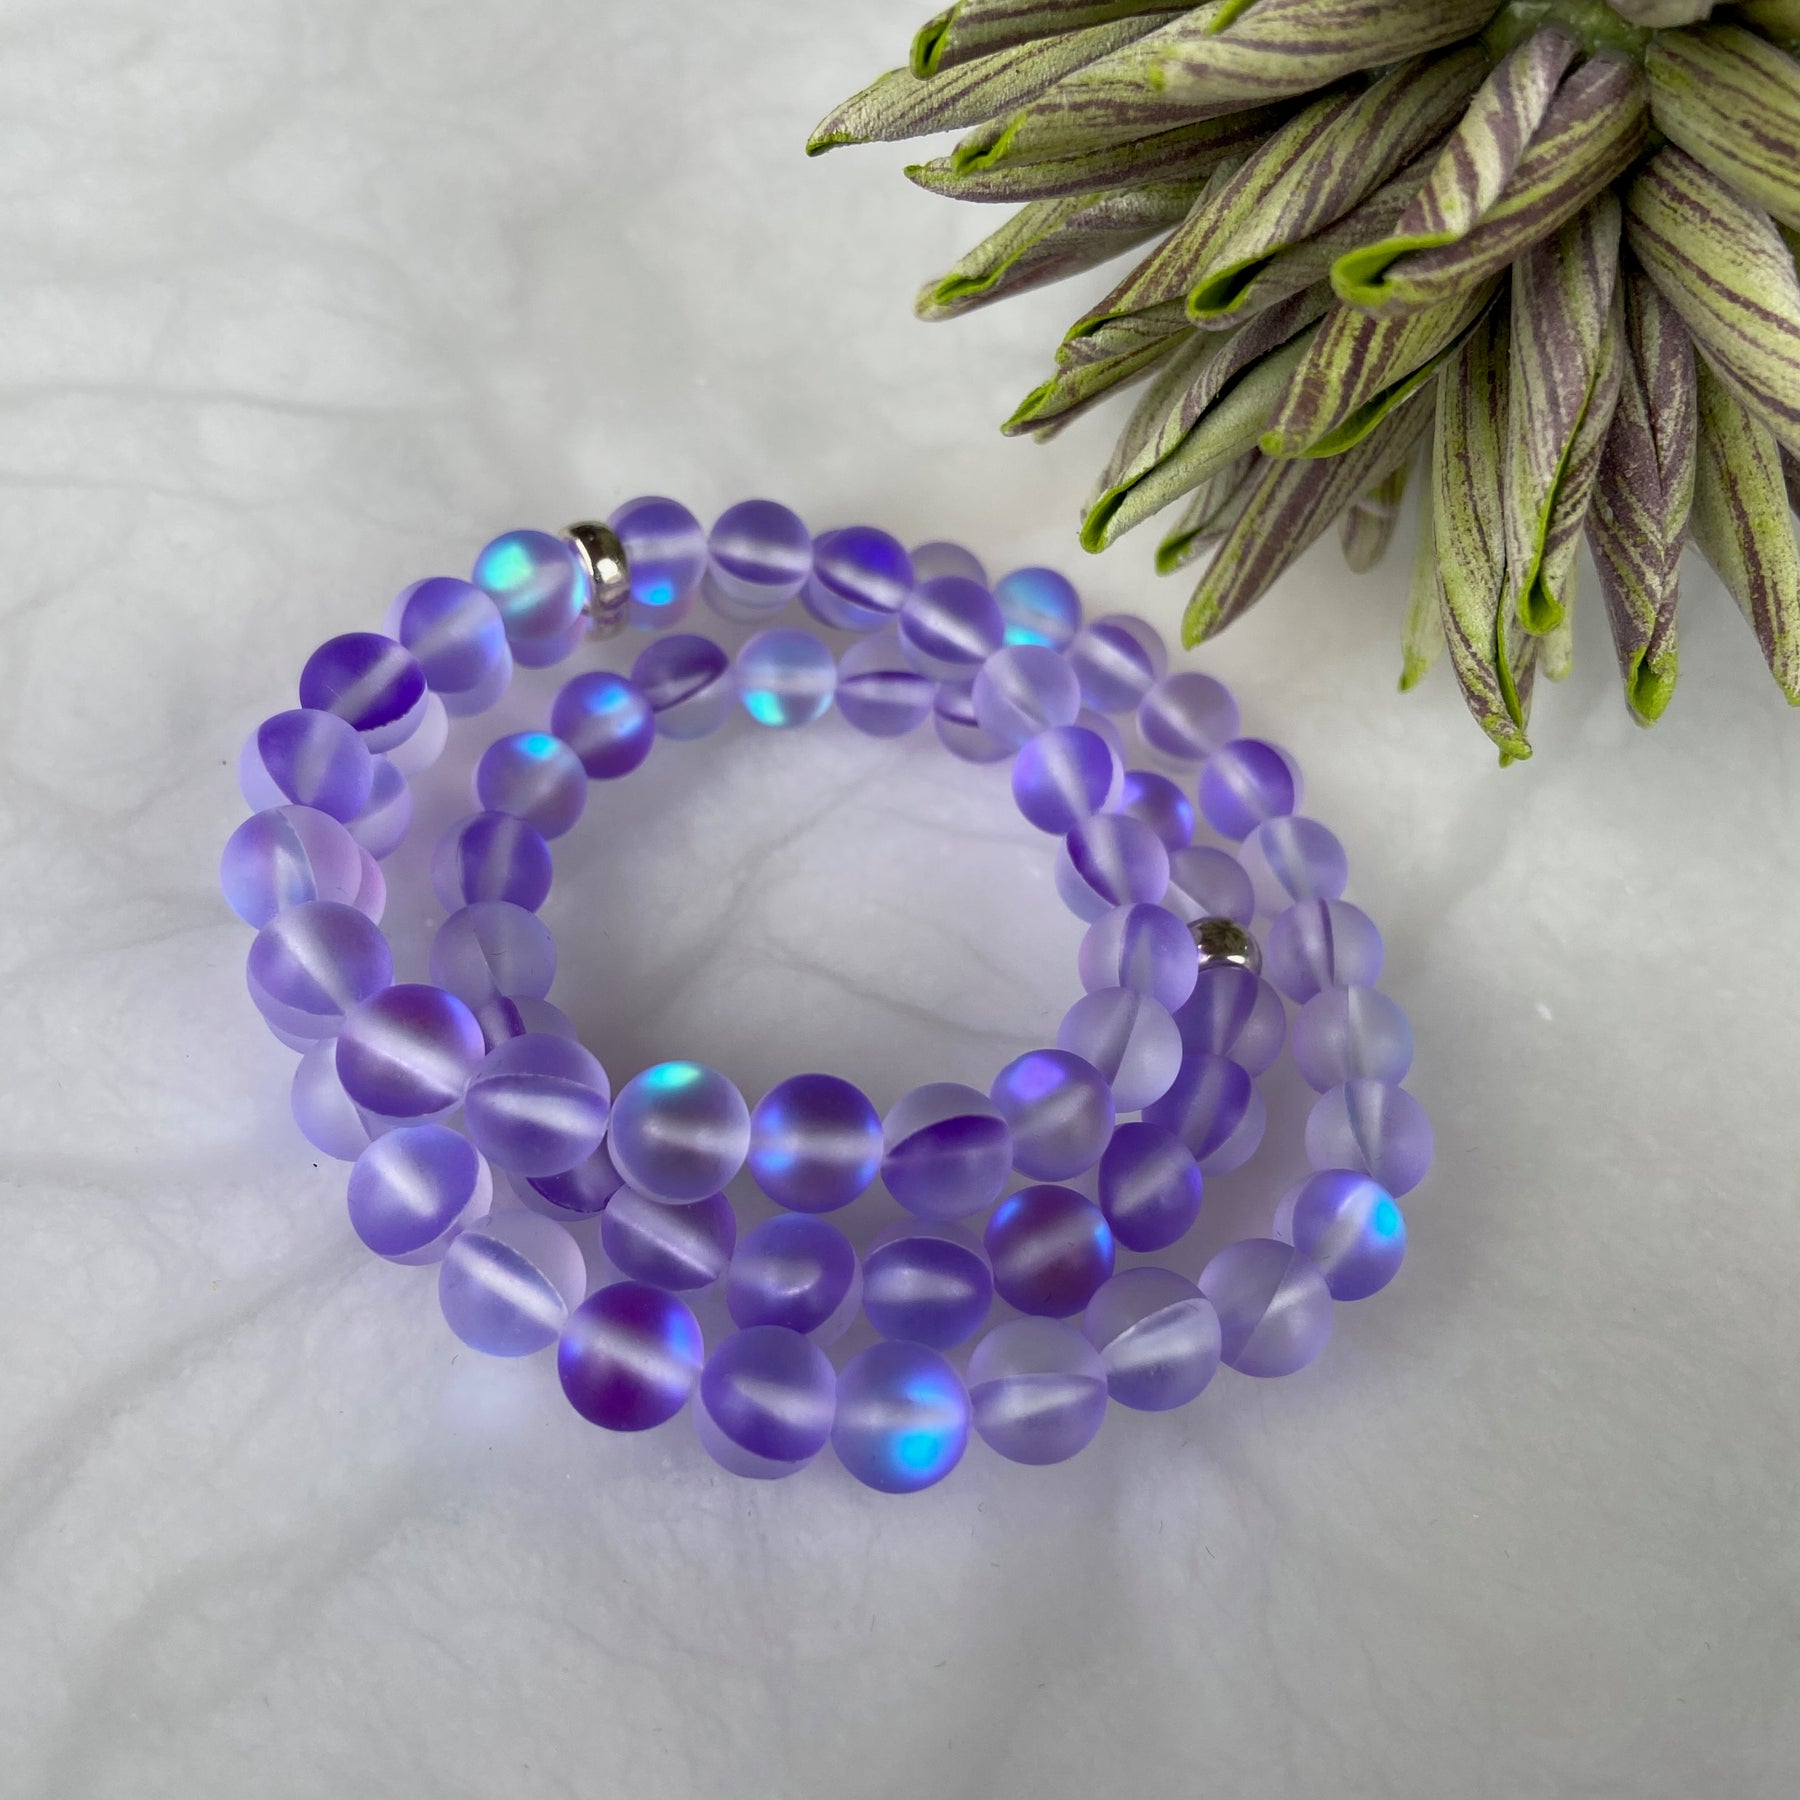 Heat Processed Charoite 8 mm Bead Bracelet Designer 3, Color- Purple, For  Men, Women, Boys & Girls (Pack of 1 Pc.) - the best price and delivery |  Globally